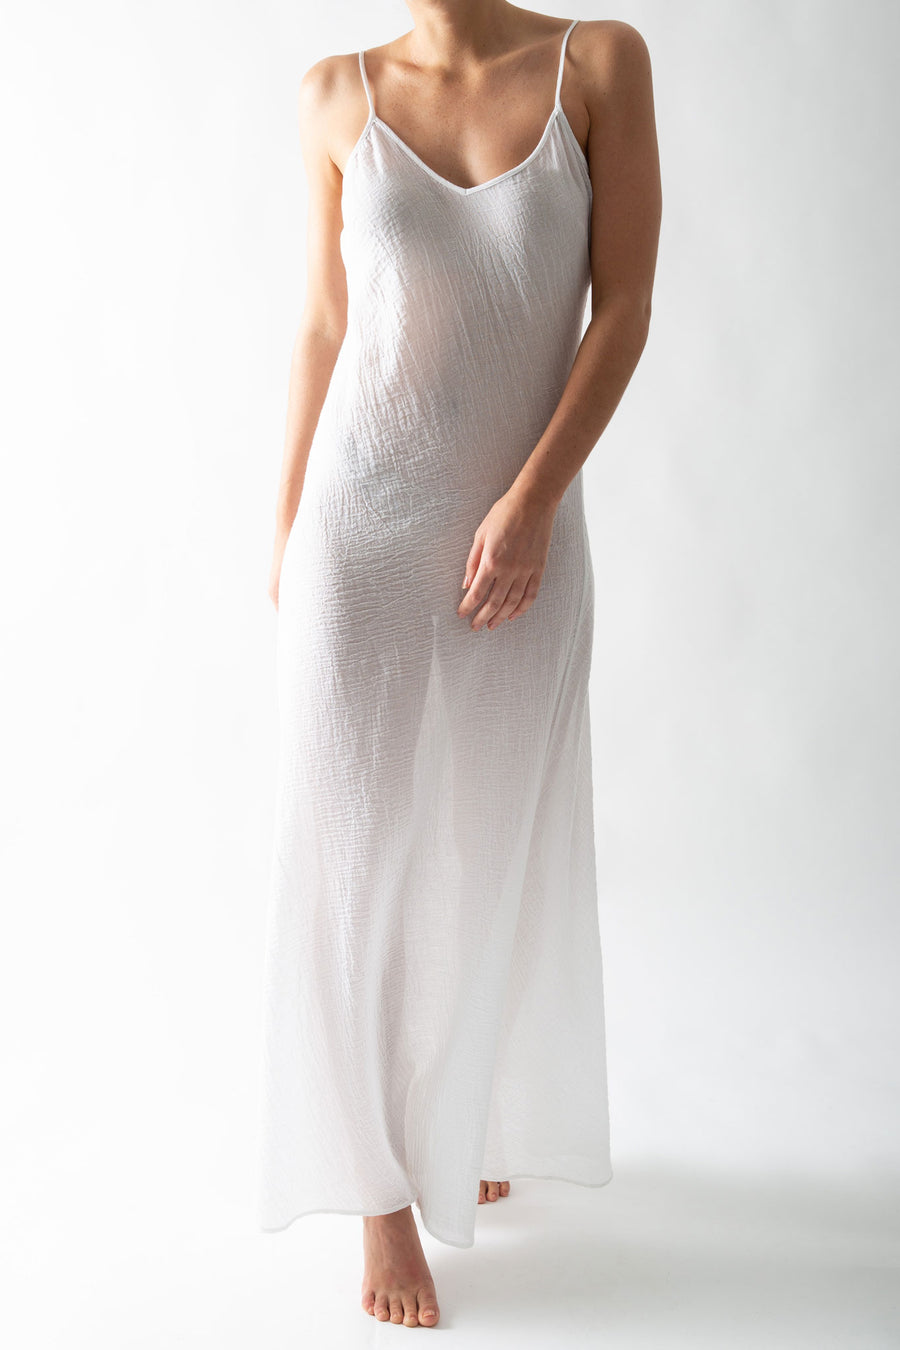 This is a photo of a woman wearing a sheer white slip dress in a cotton gauze material. 